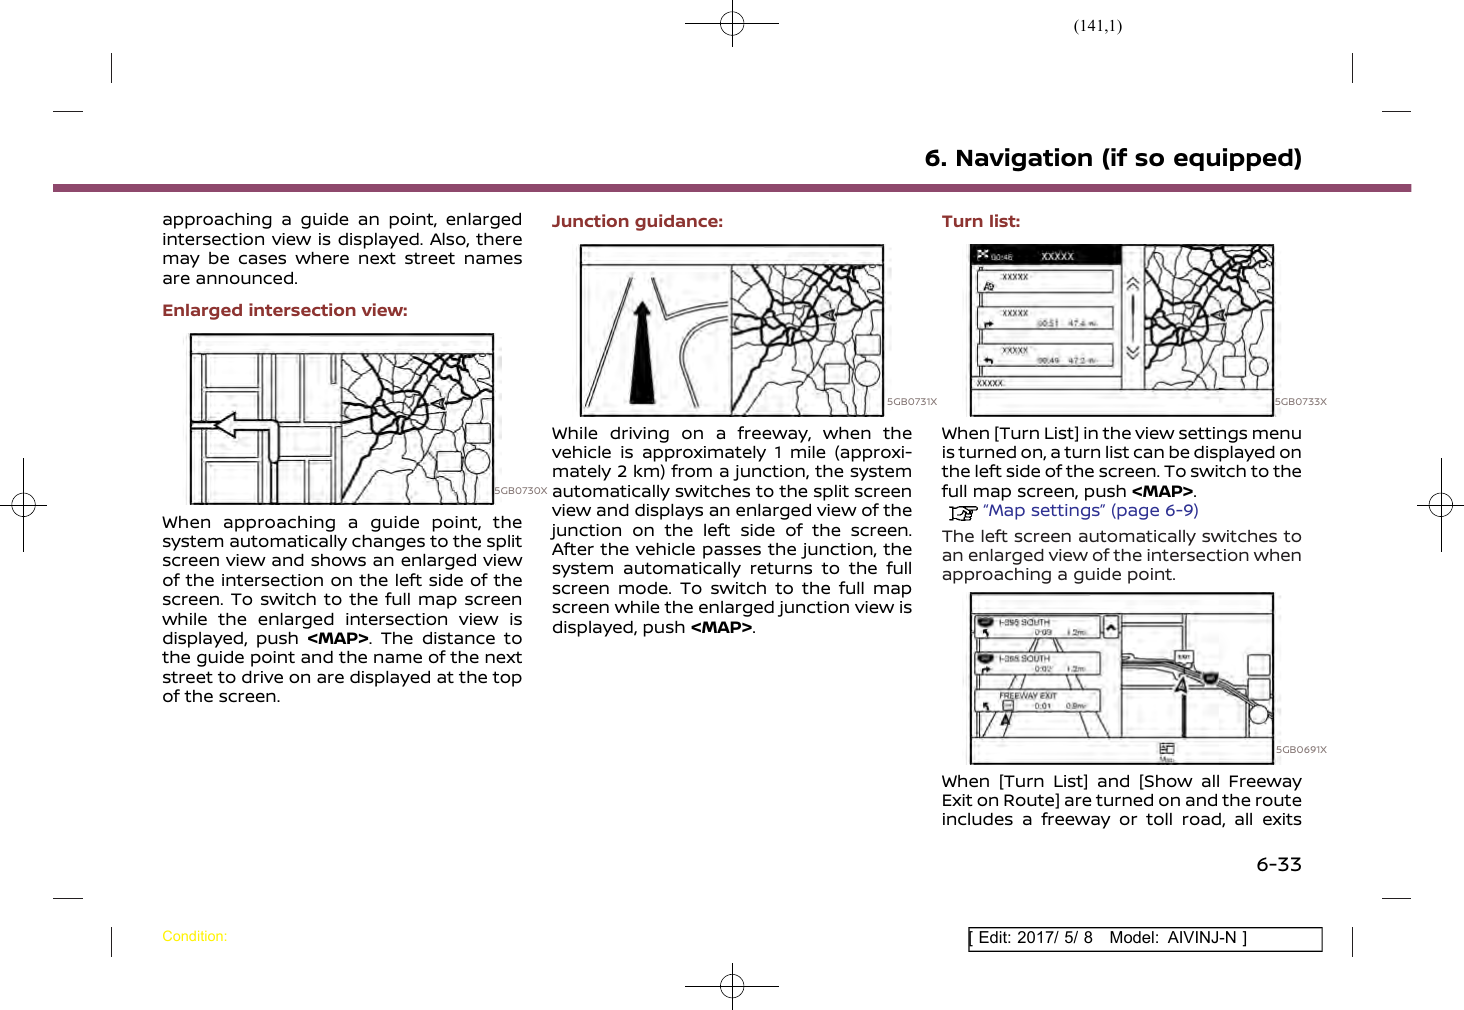 Page 141 of Robert Bosch Car Multimedia AIVICMFB0 Navigation System with Bluetooth and WLAN User Manual